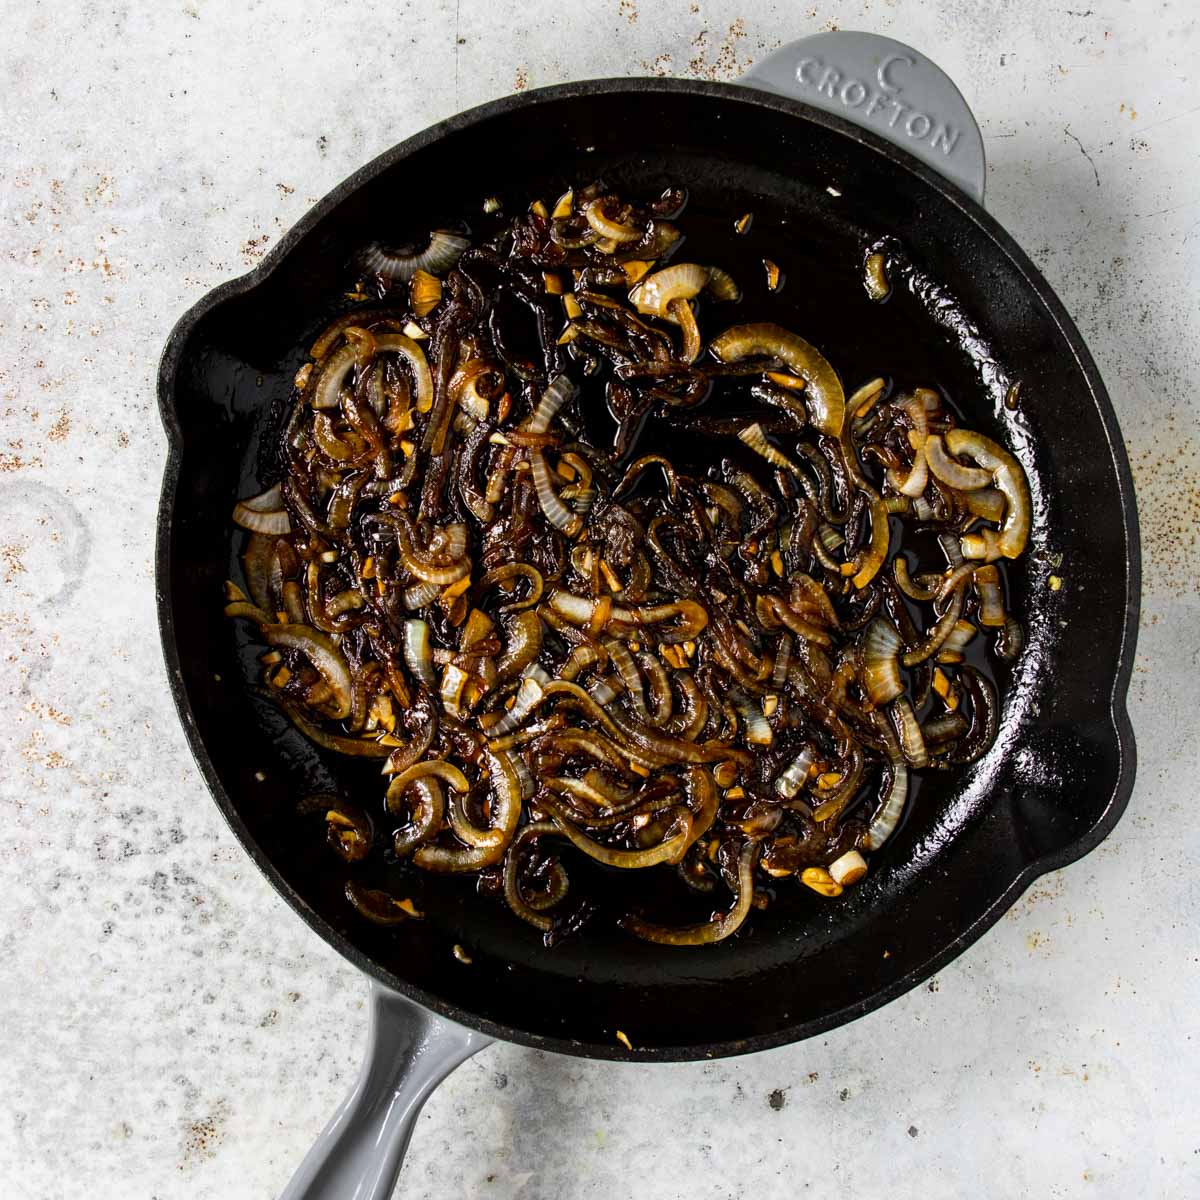 A skillet with carmalized onions in a brown sweet and savory syrup